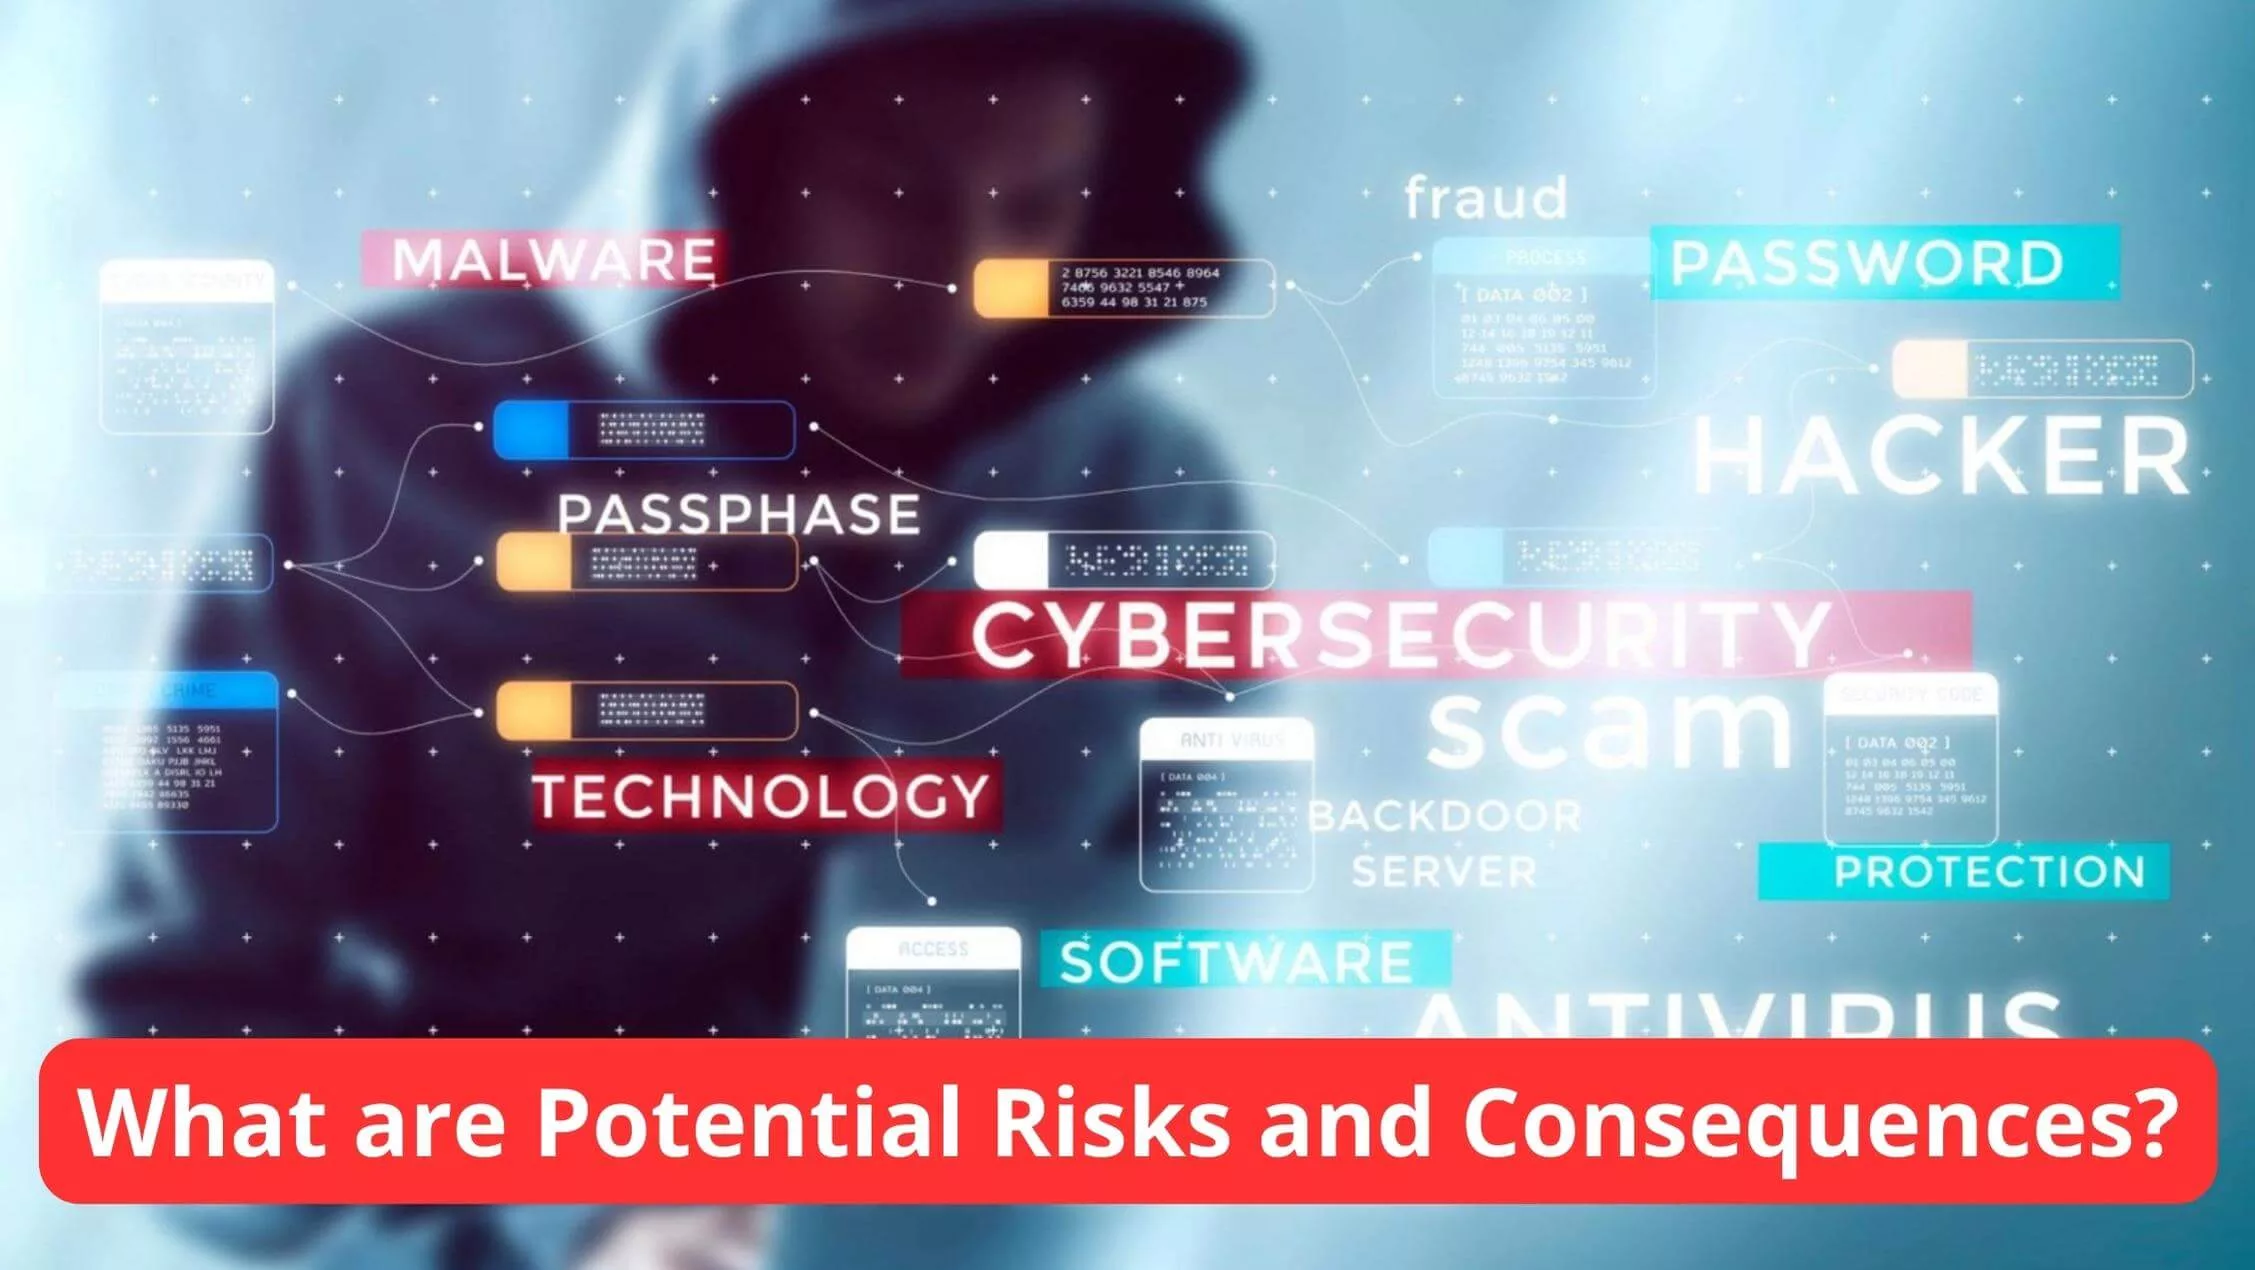 What are Potential Risks and Consequences?